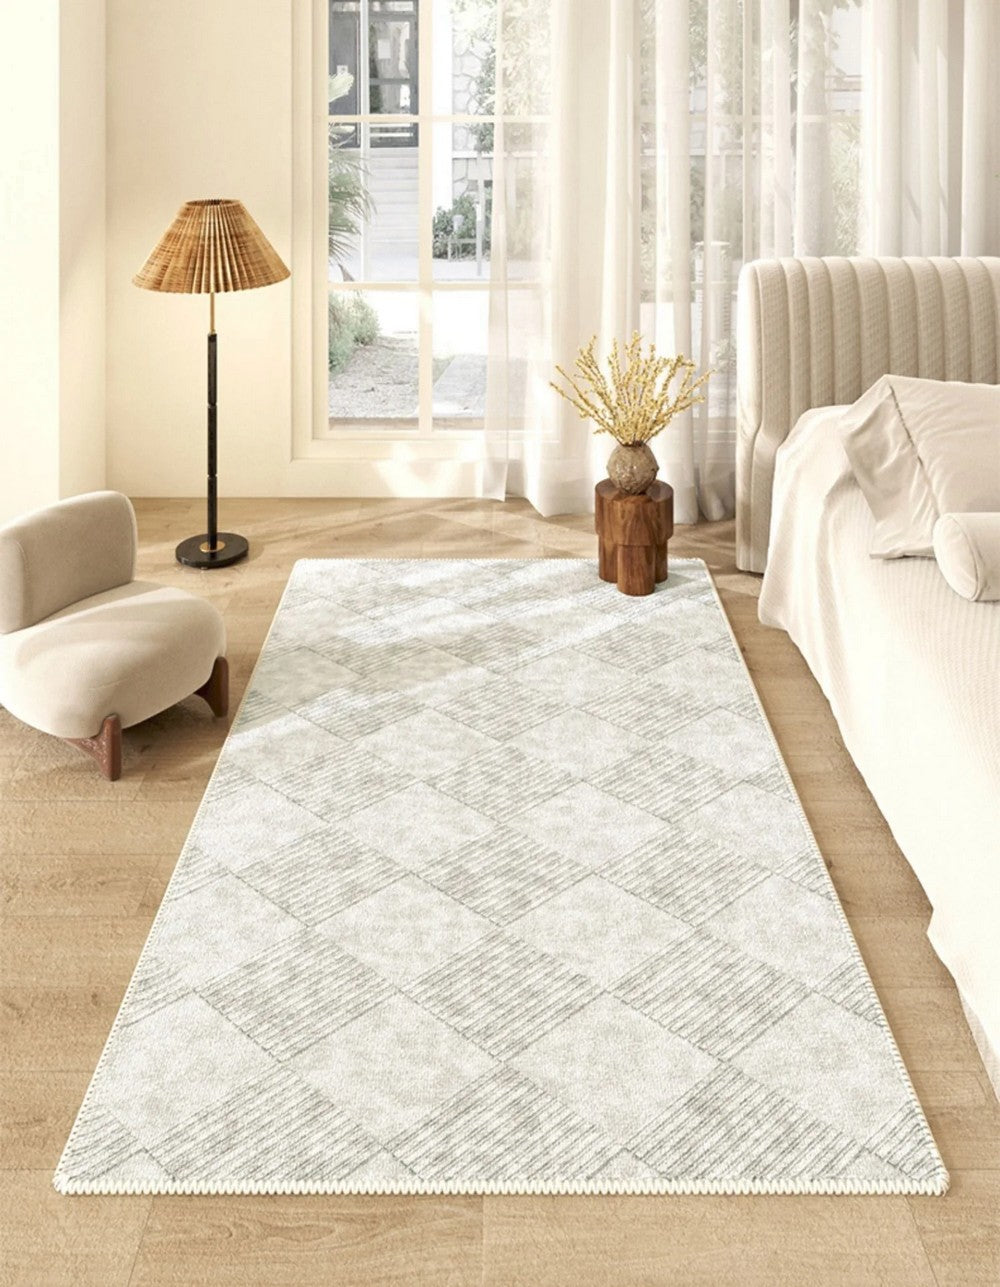 Simple Geometric Carpets for Kitchen, Large Modern Rugs under Dining Room Table, Abstract Modern Rugs for Living Room, Contemporary Modern Rugs Next to Bed